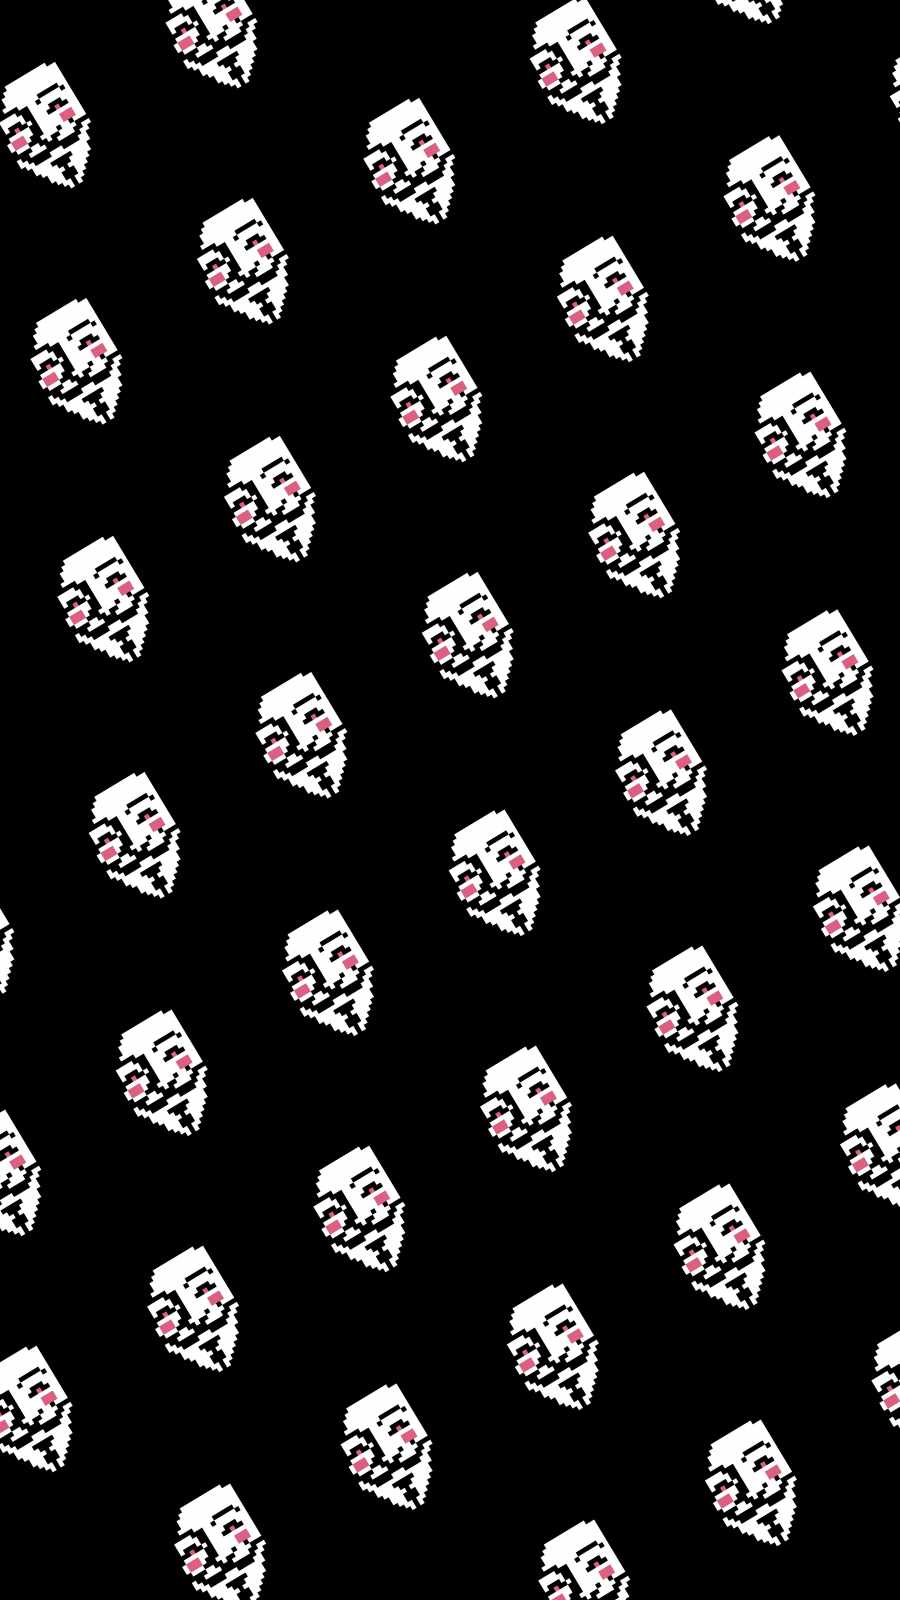 Anonymous Pattern iPhone Wallpaper